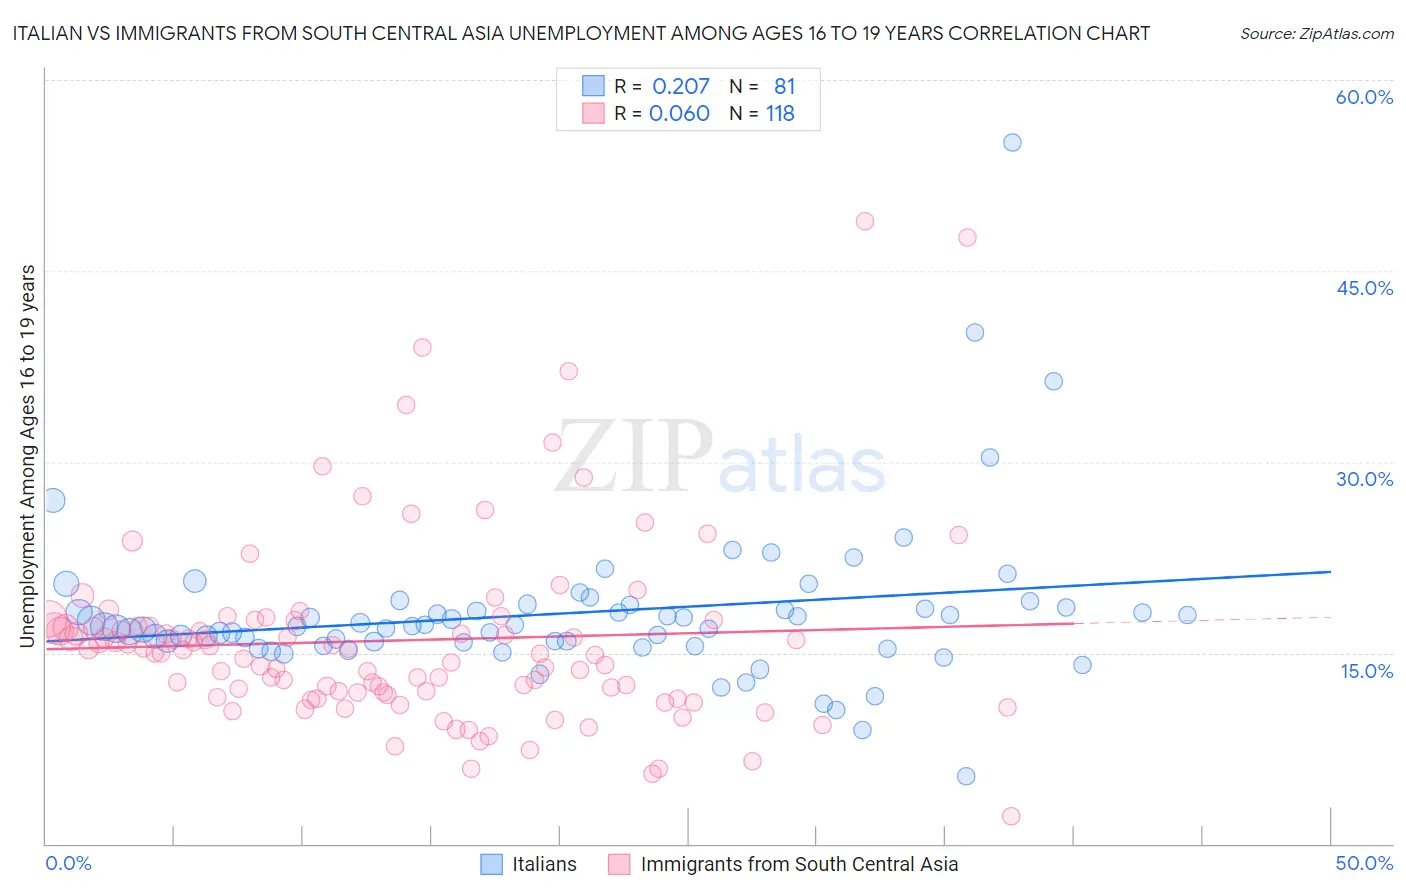 Italian vs Immigrants from South Central Asia Unemployment Among Ages 16 to 19 years